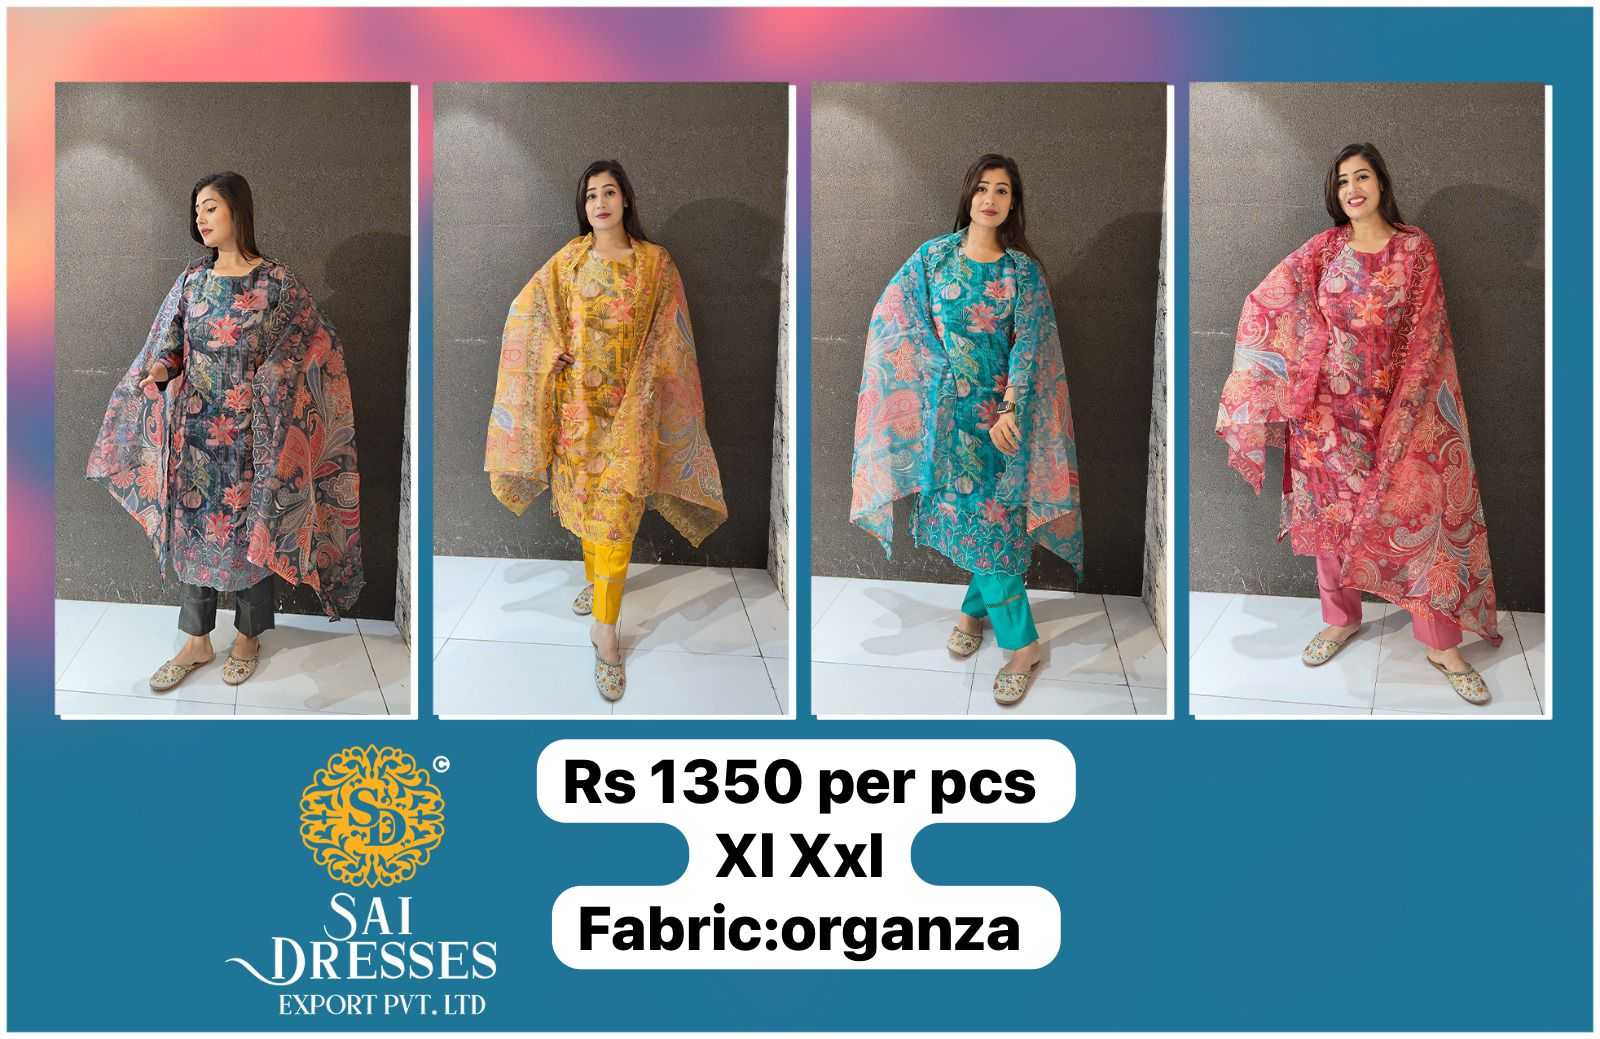 SAI DRESSES PRESENT D.NO SD1072 TO SD1075 READY TO EXCLUSIVE TRENDY WEAR DESIGNER PAKISTANI 3 PIECE CONCEPT COMBO COLLECTION IN WHOLESALE RATE IN SURAT